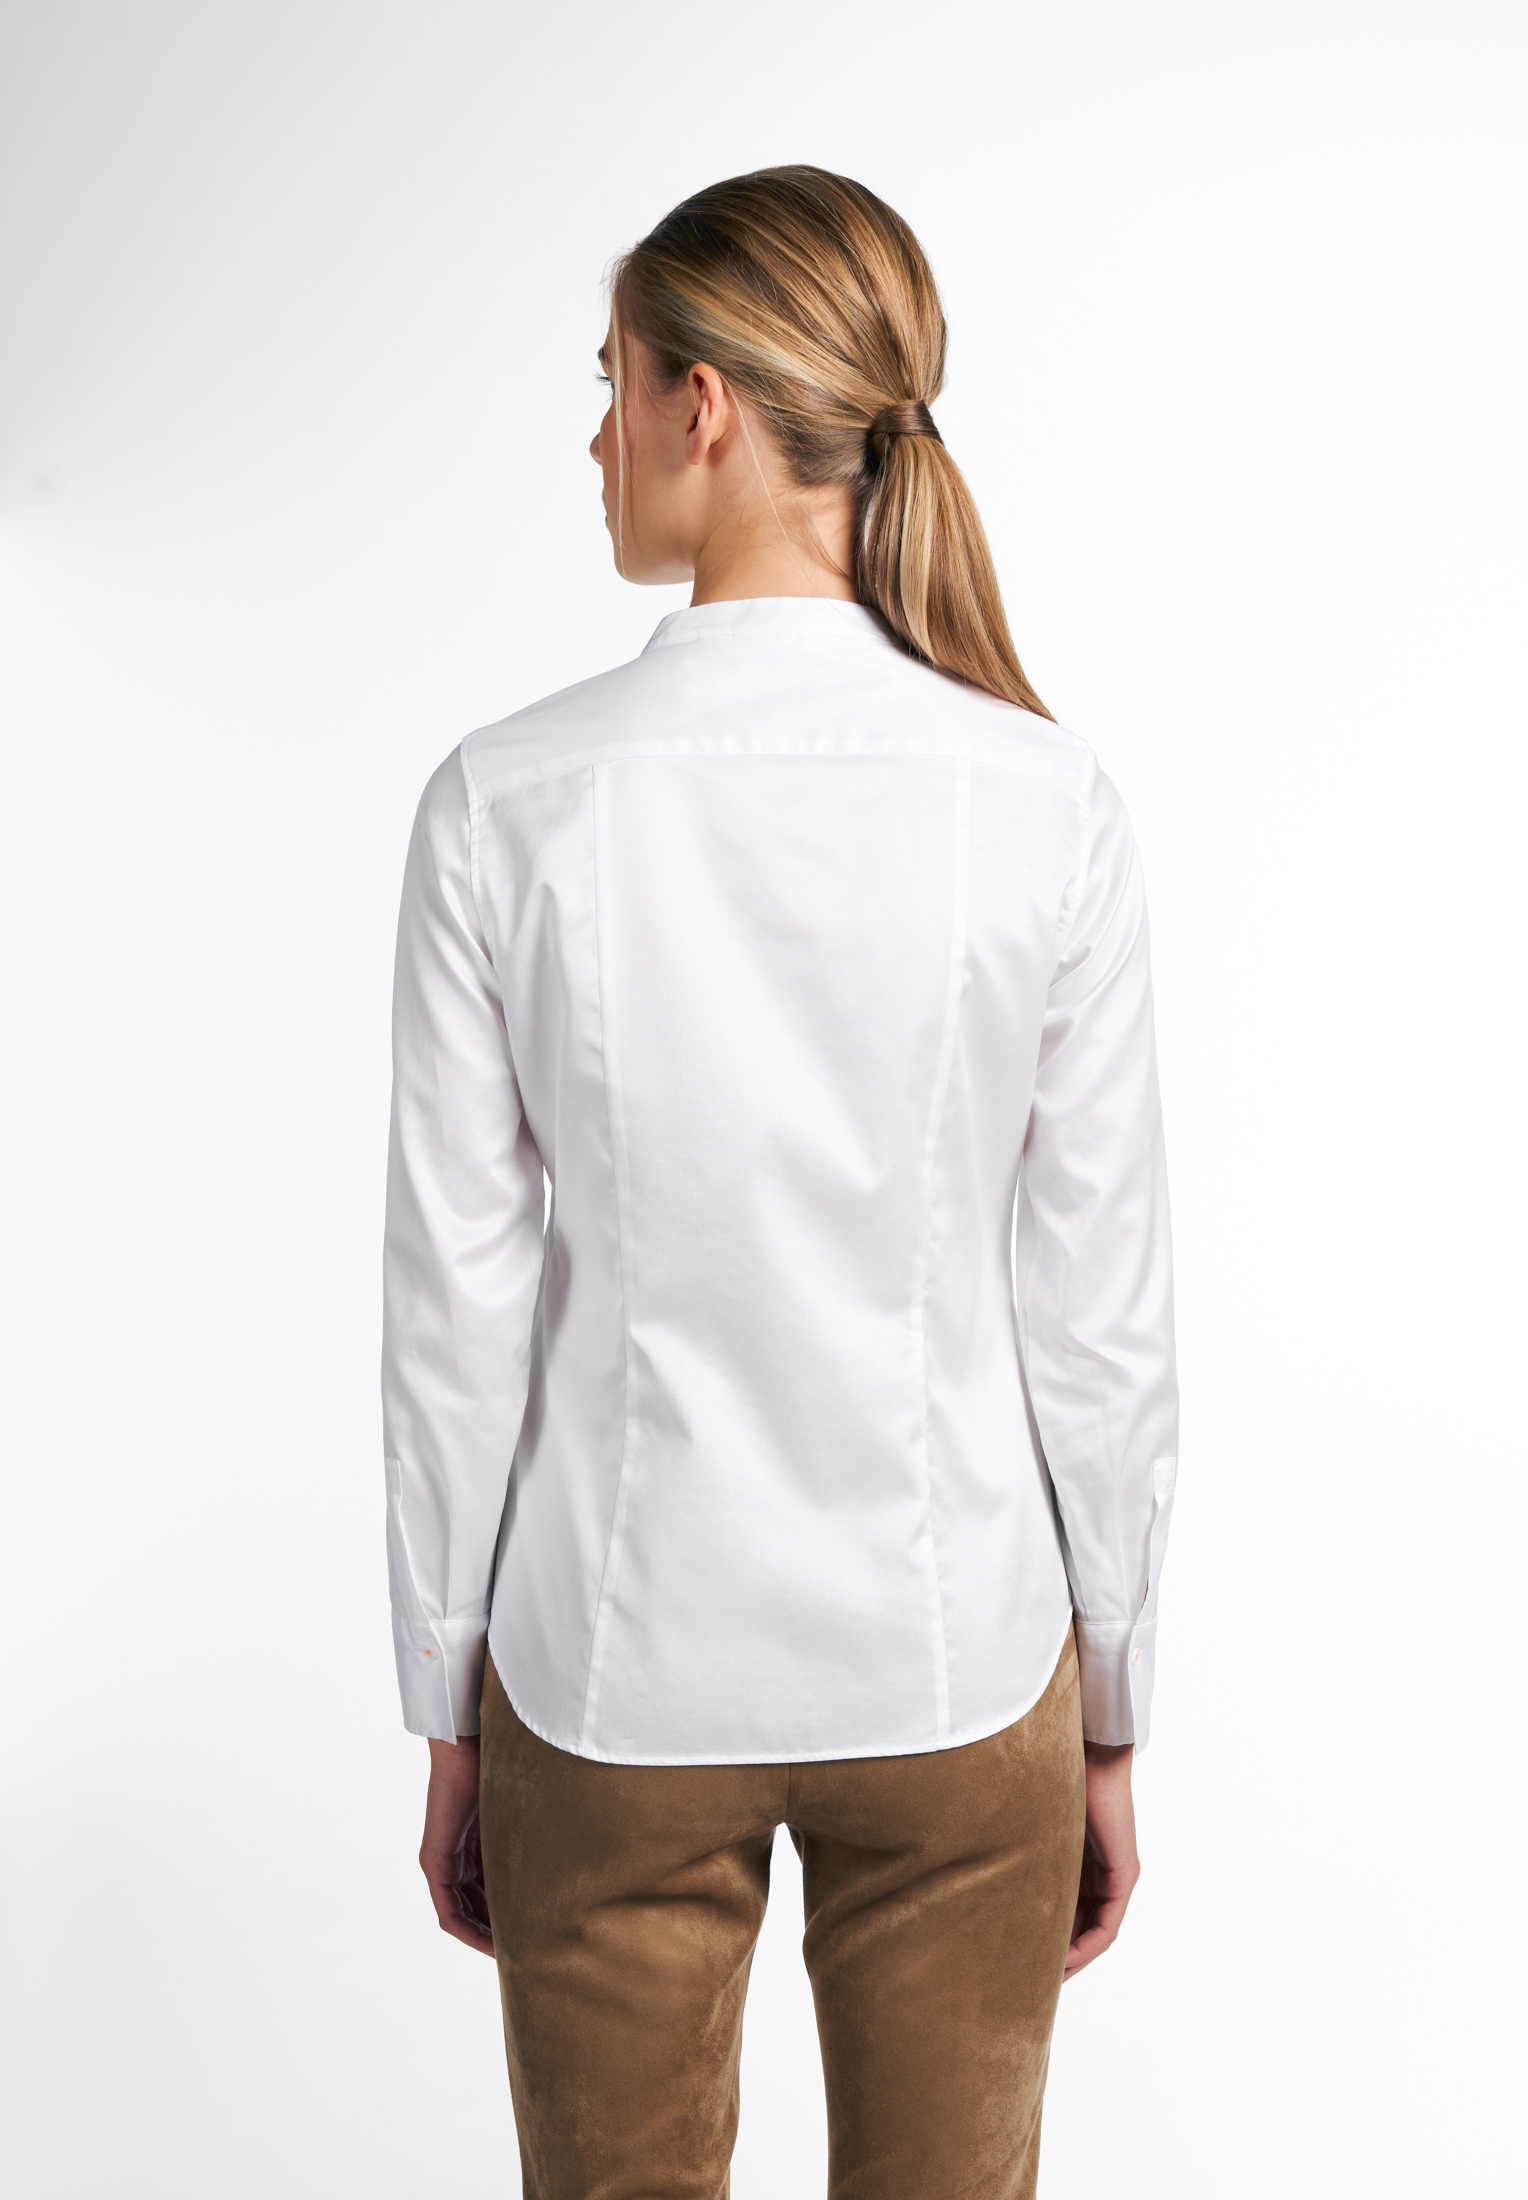 Soft Luxury Shirt Bluse | 2BL03742-00-02-38-1/1 | Langarm off-white off-white unifarben | in | 38